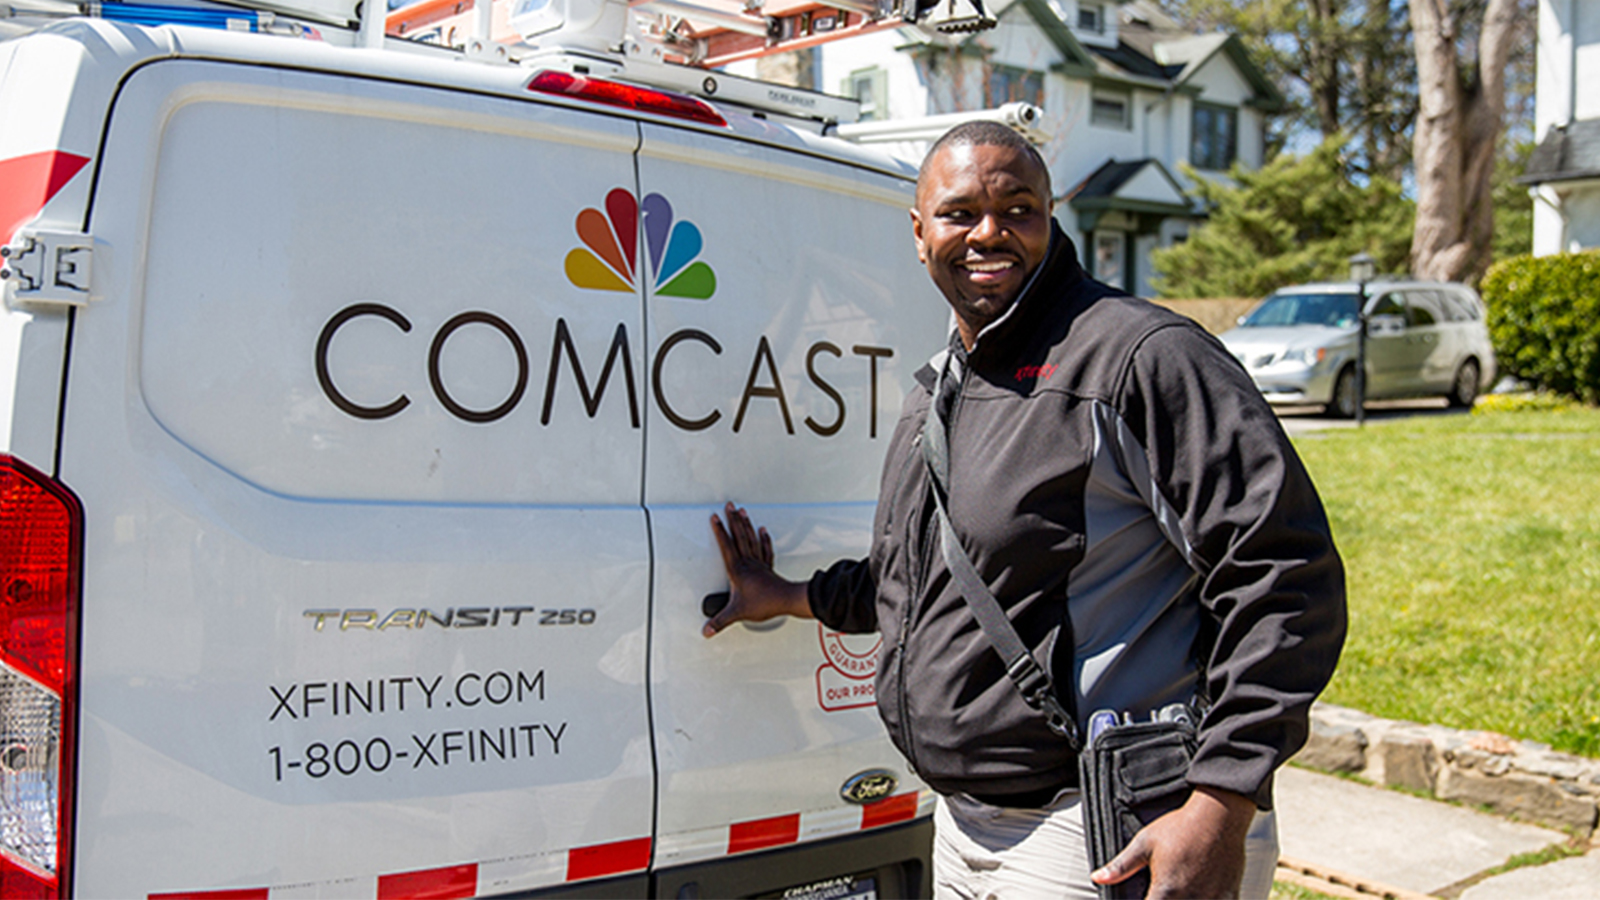 Comcast technician at the back of his truck.